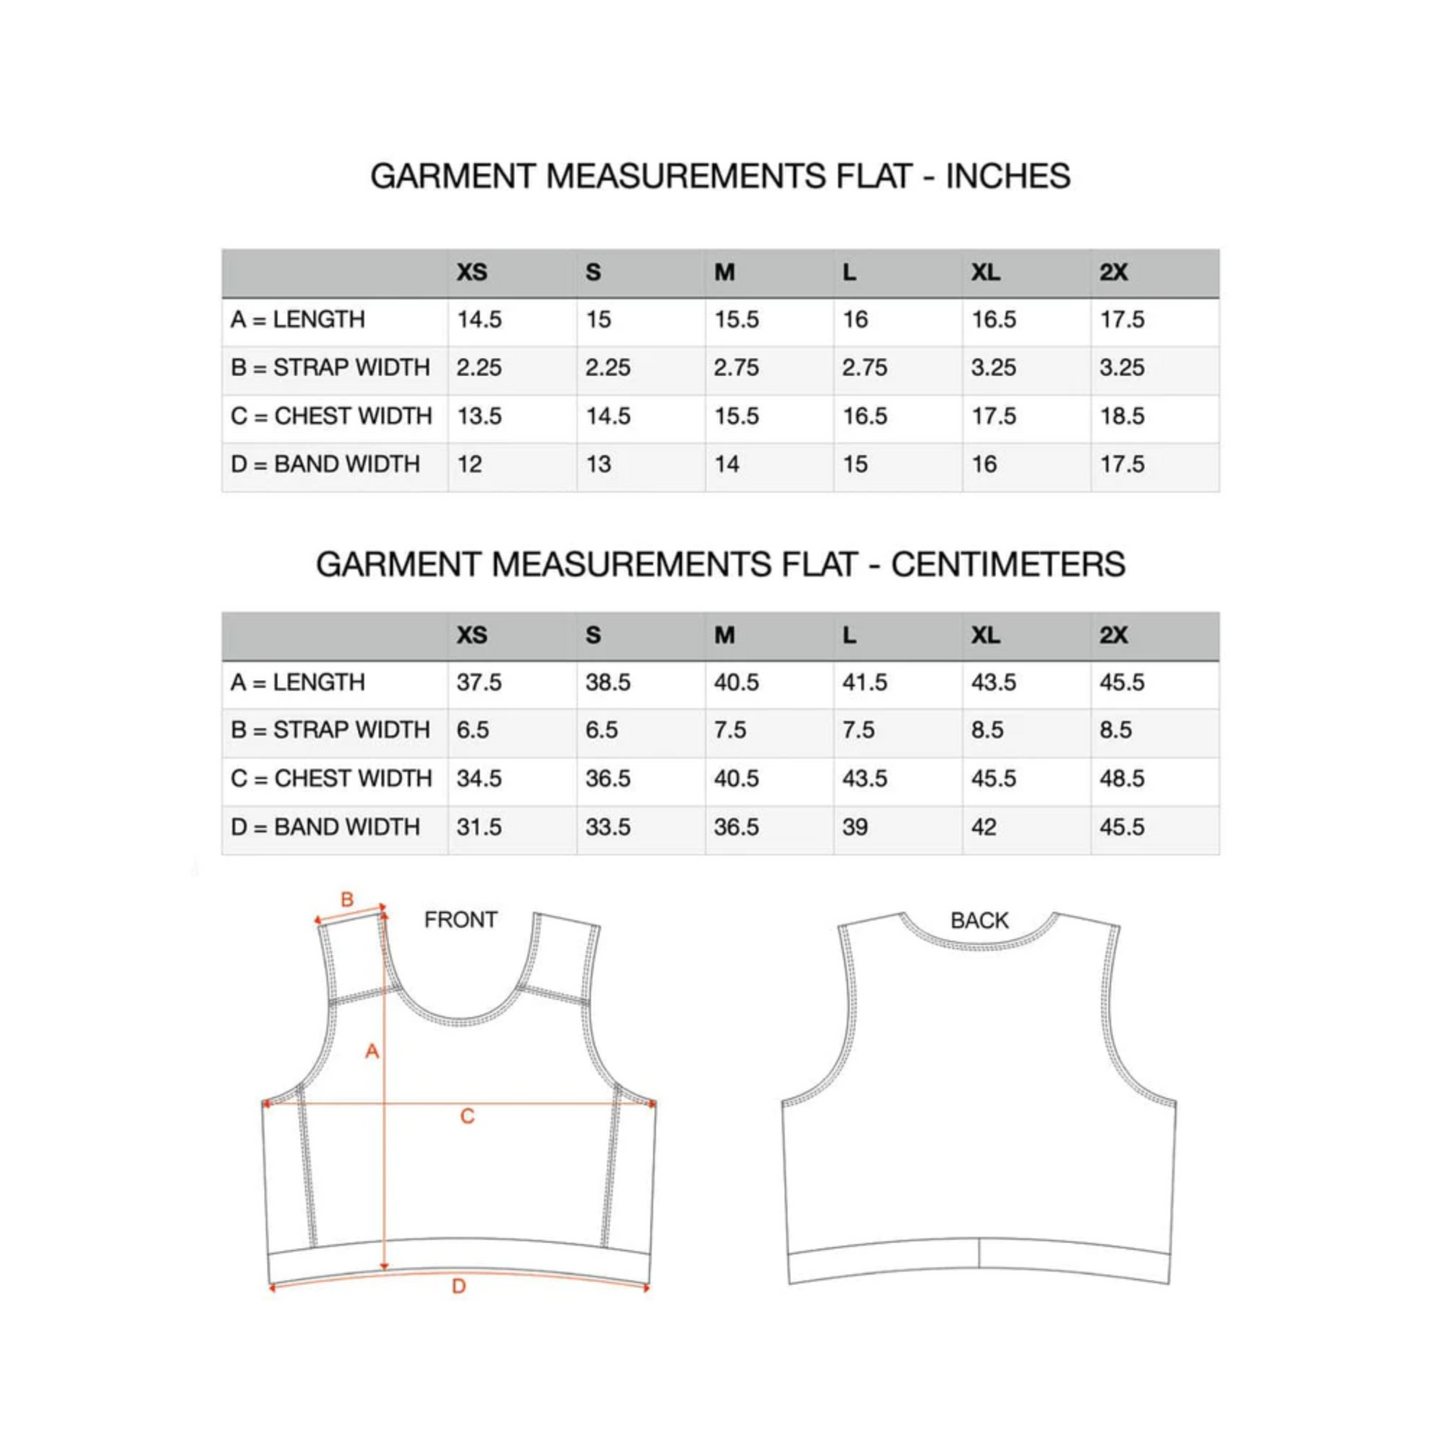 Compression Top - Light Marle Gray